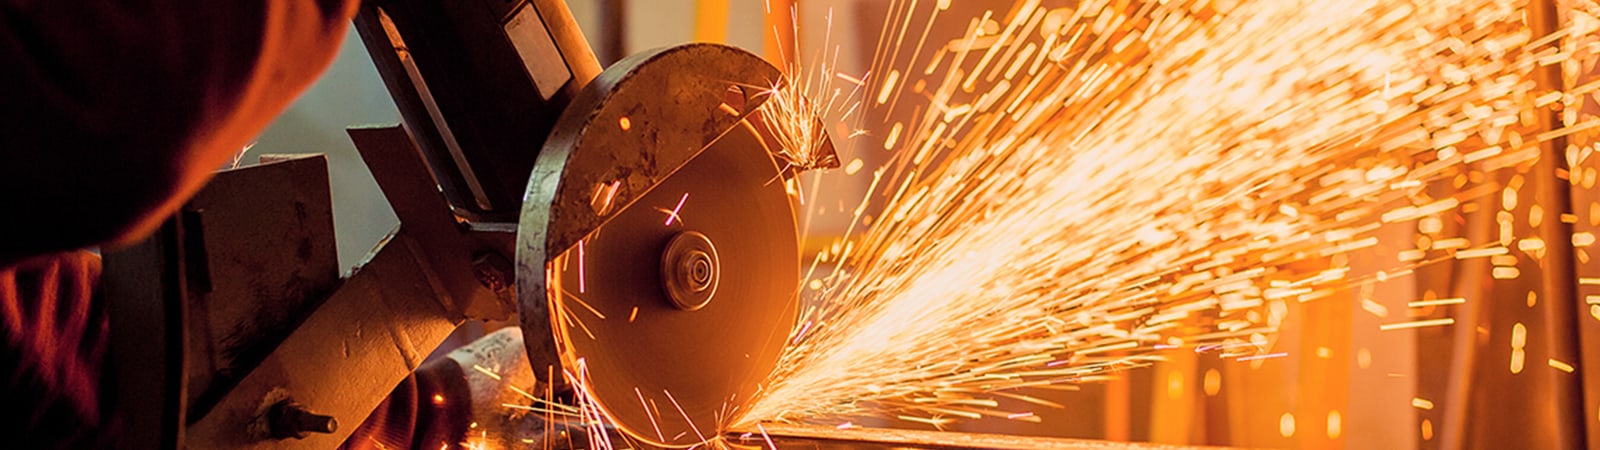 Cutting wheel with sparks